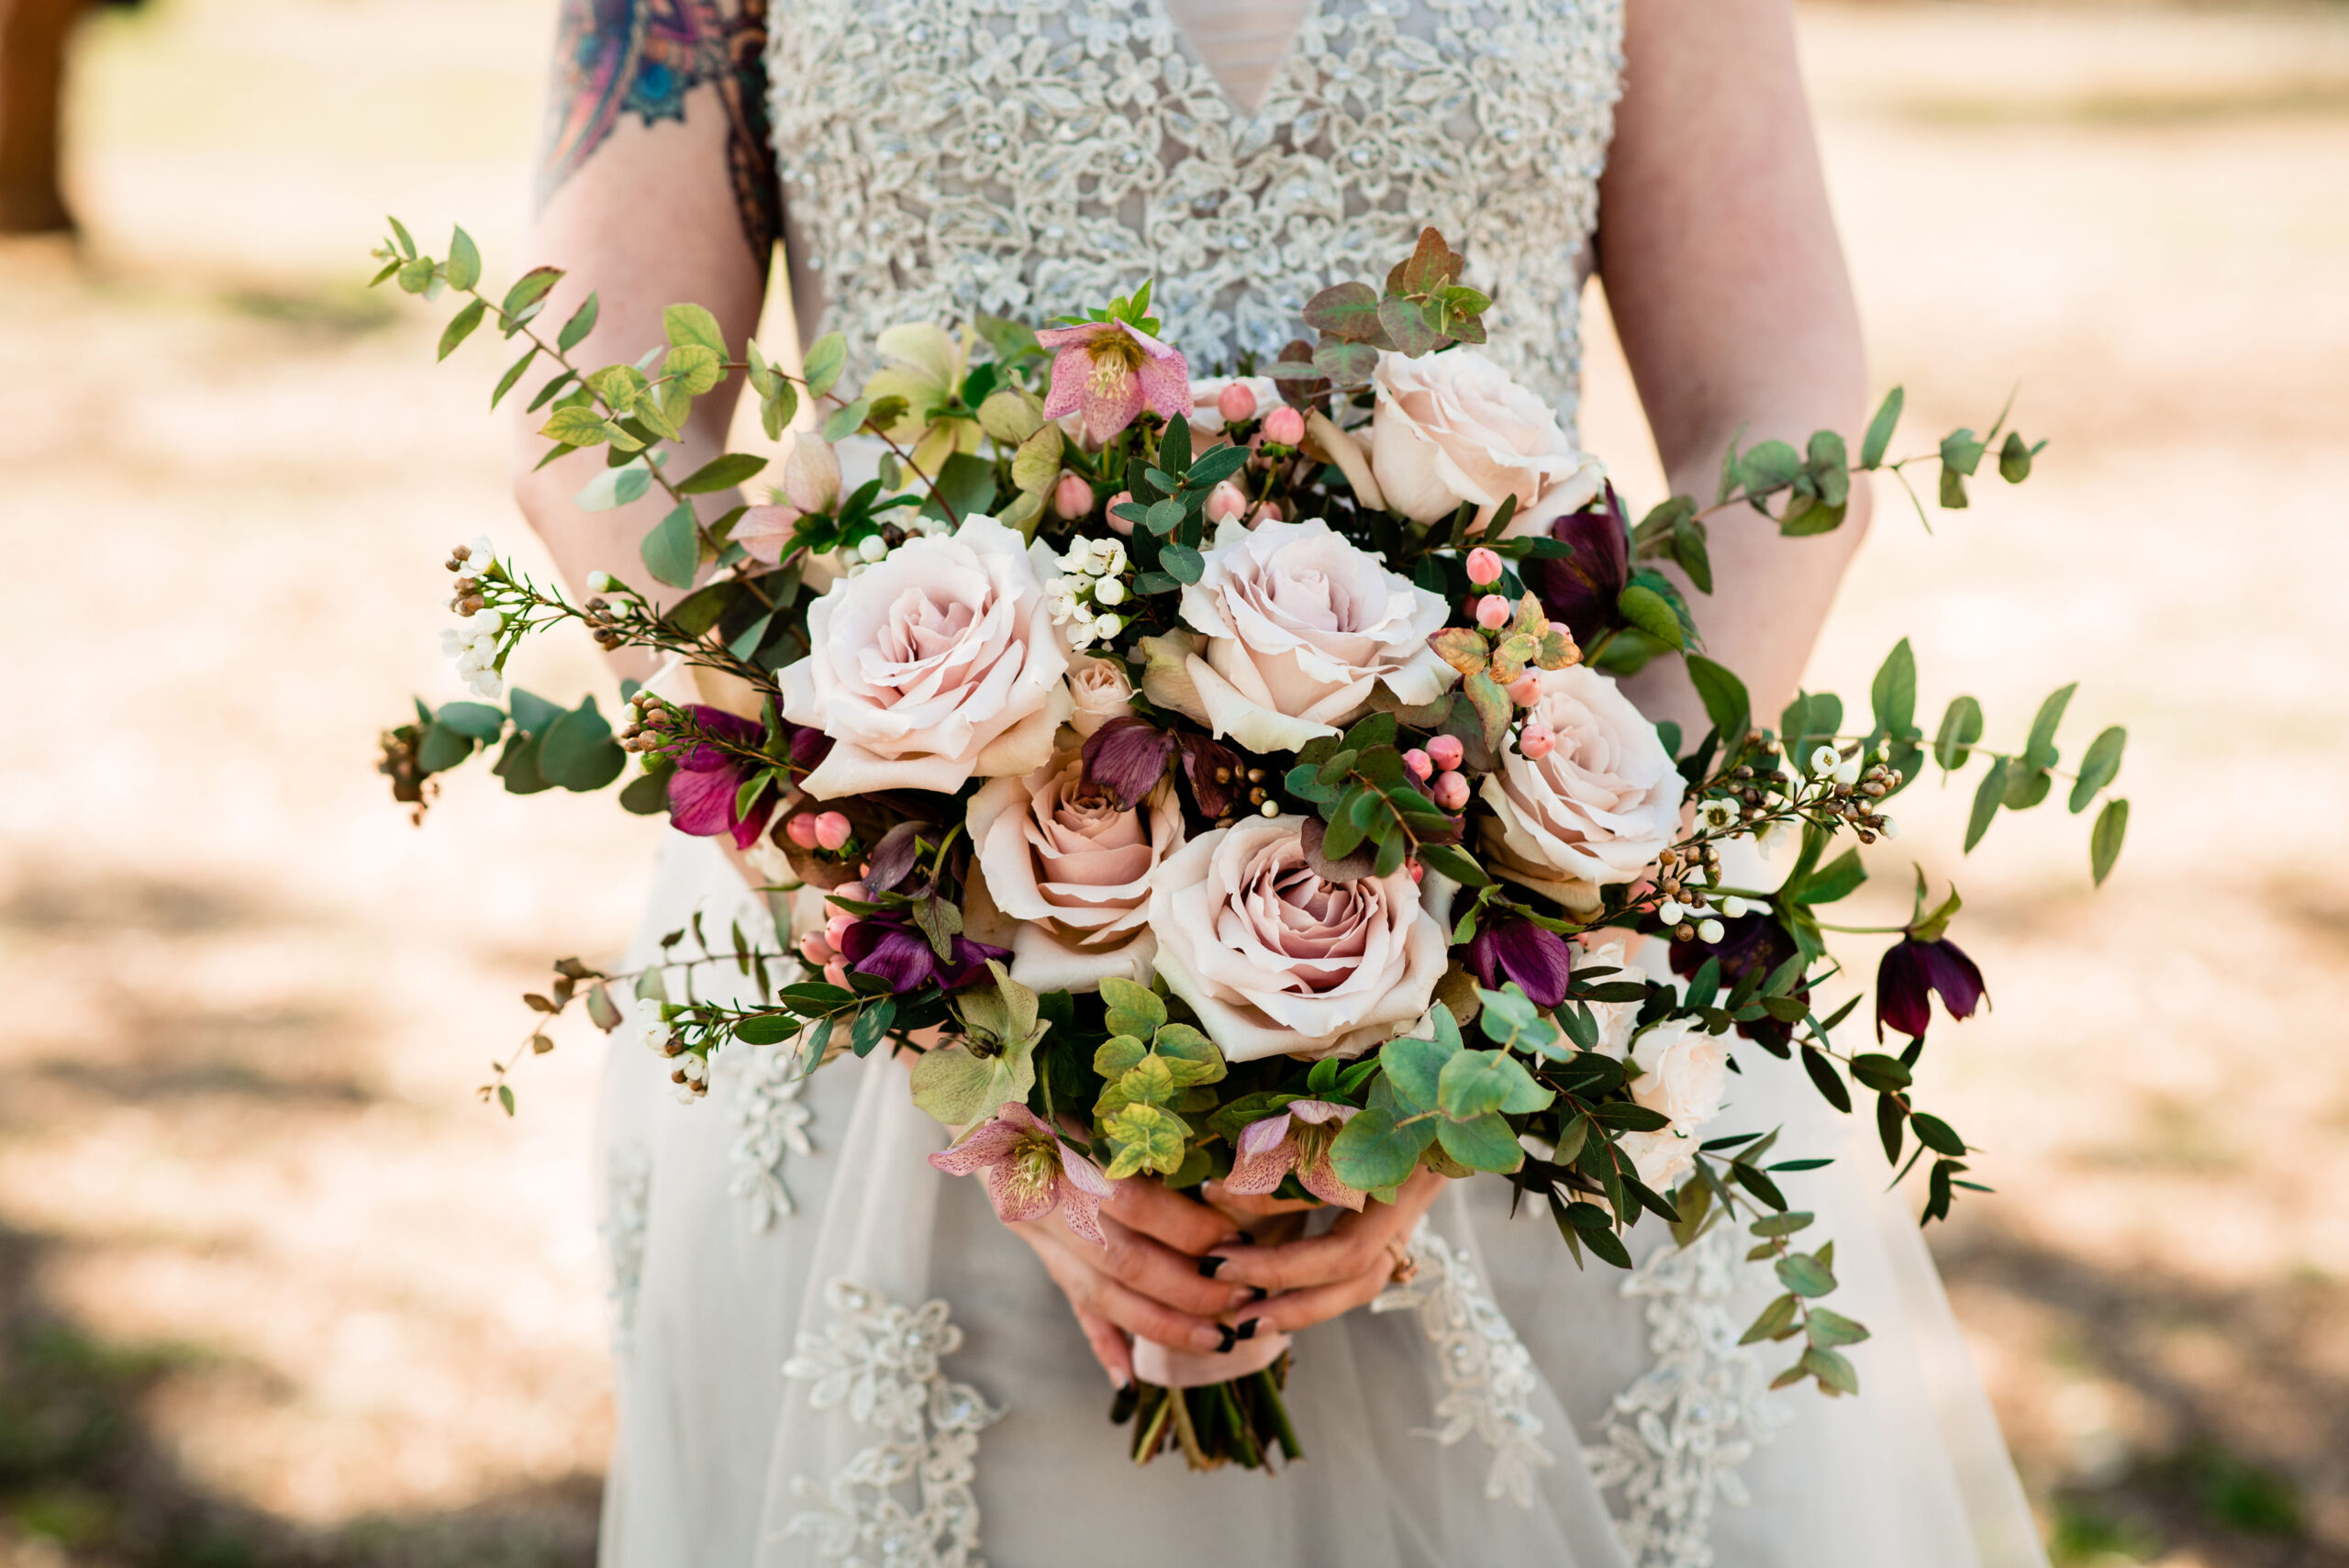 The bride, wearing a v-neck silver lace wedding dress with a tulle skirt and floral appliques. She holds a large bouquet of eucalyptus, blush roses, magenta and pink flowers and pink berries. 